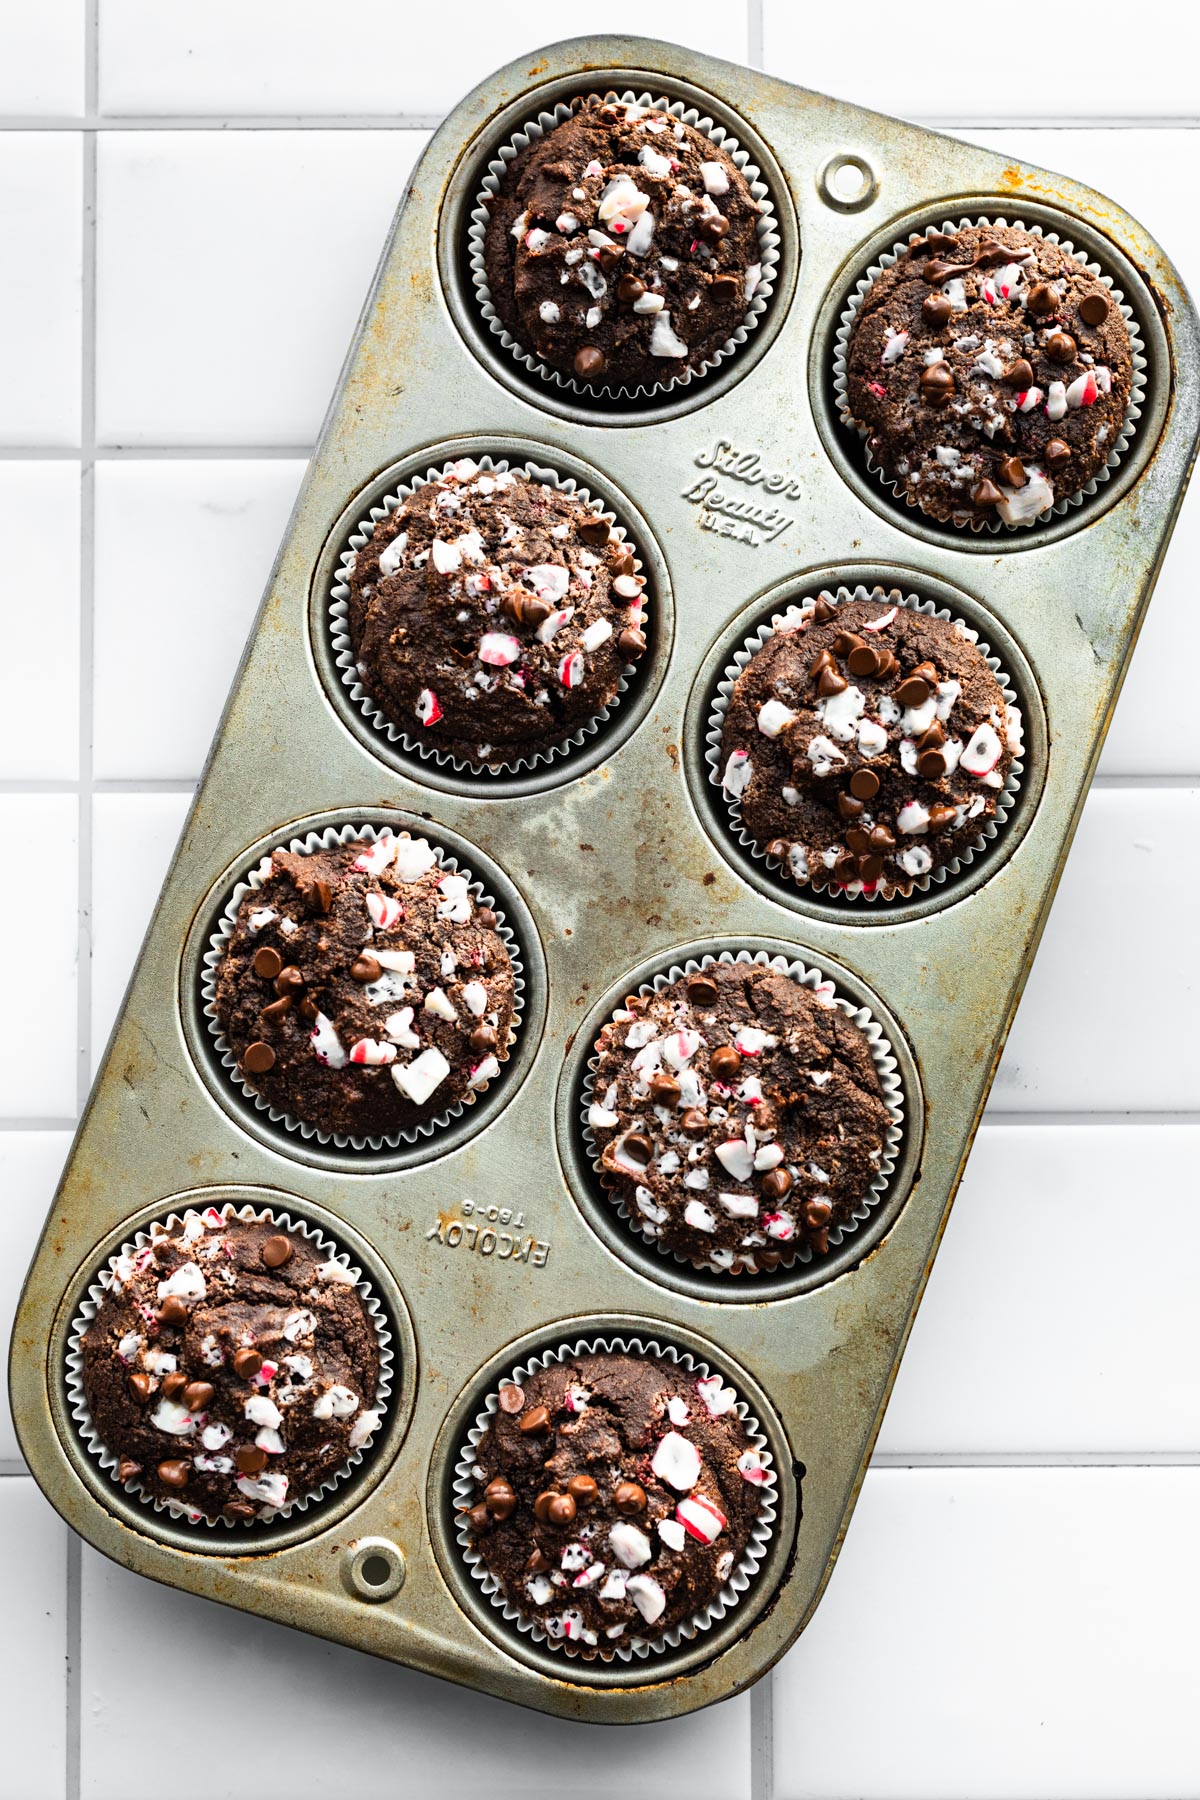 A pan of baked gluten free chocolate peppermint muffins topped with crushed candies.